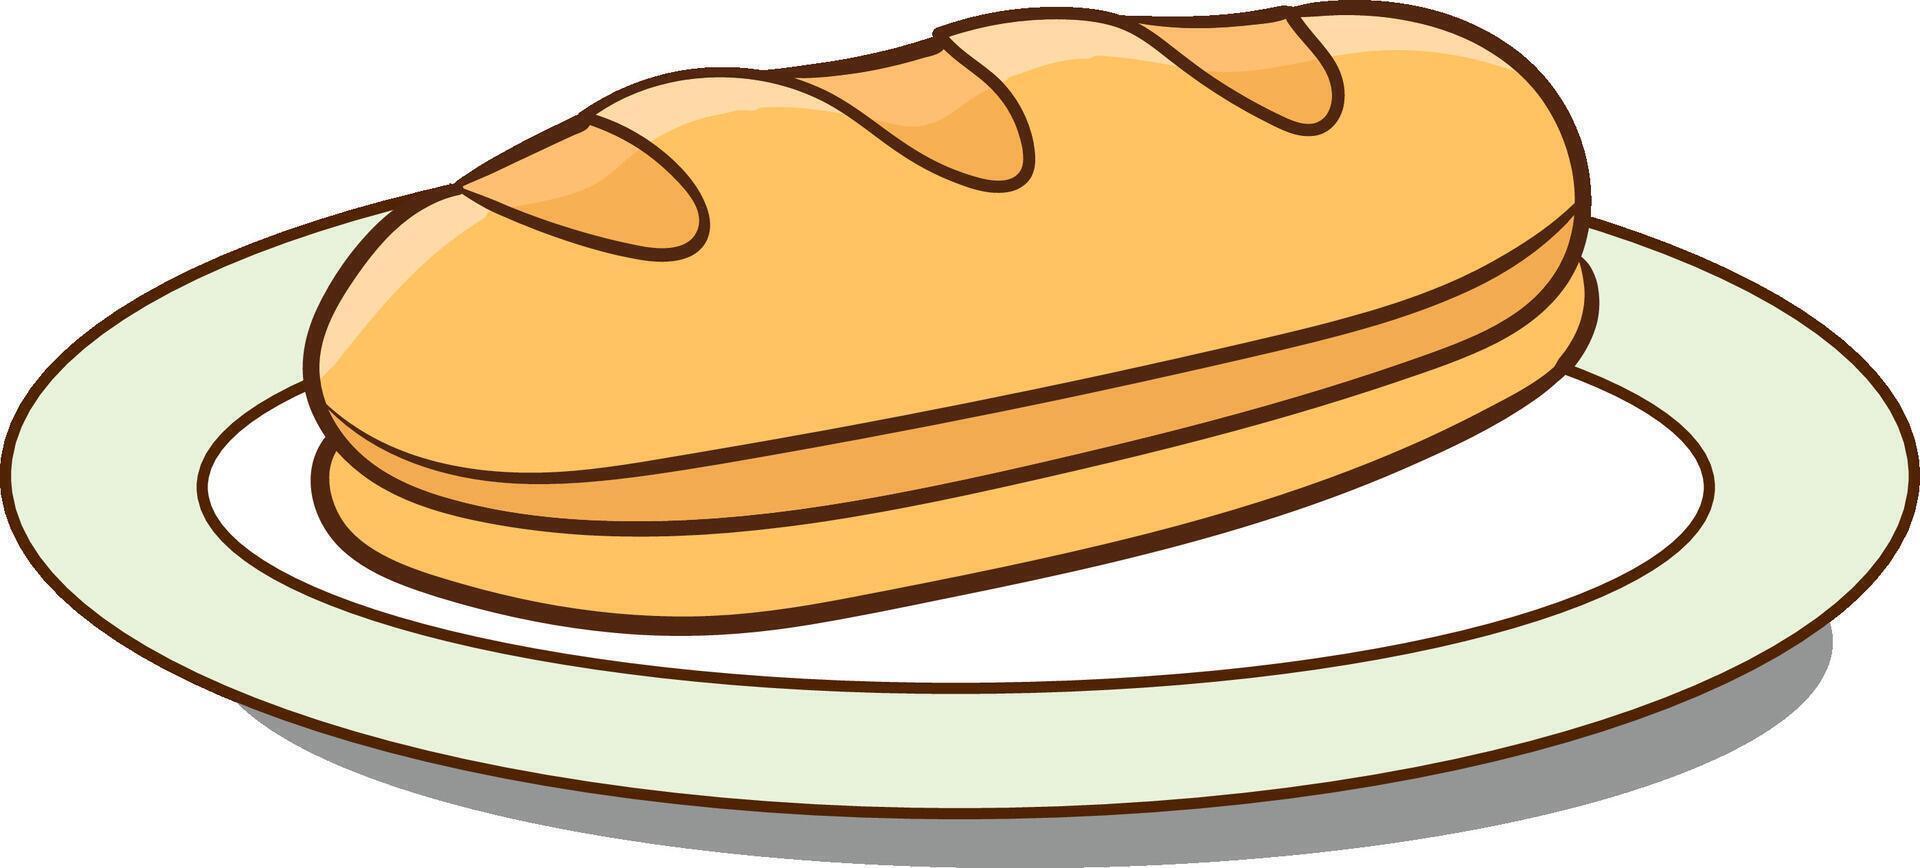 vector illustration of a sandwich bread on a plate with a white background